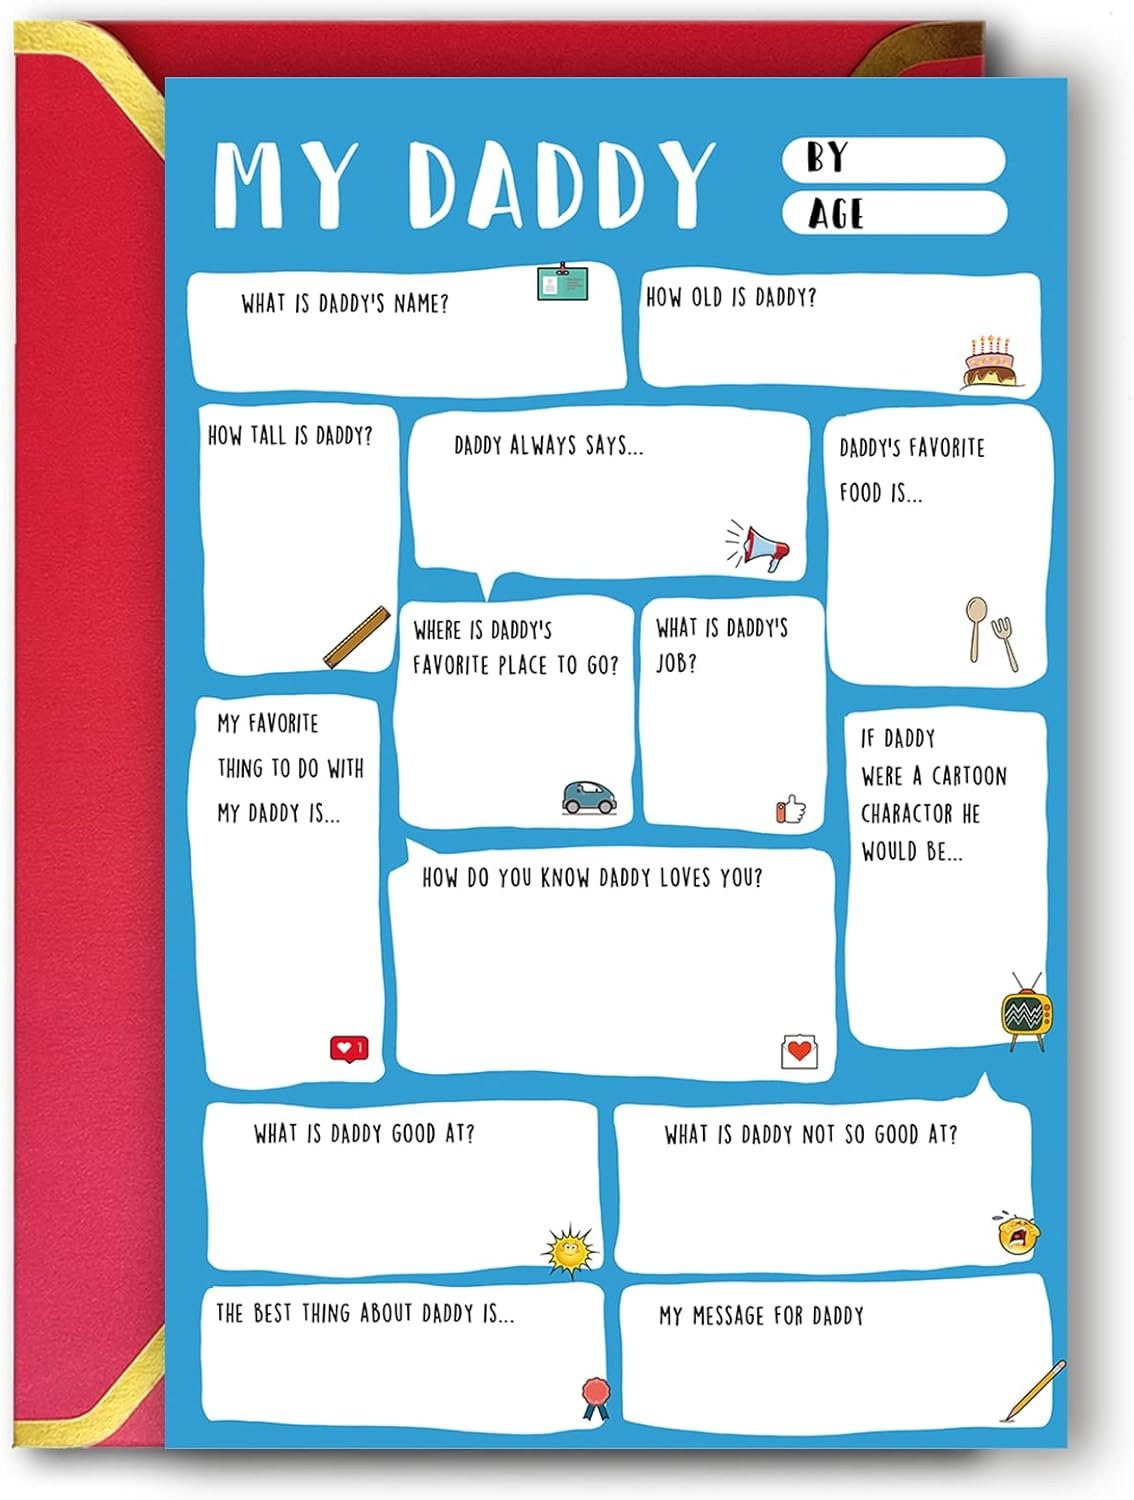 Ziwenhu Daddy Fathers Day Card,Funny Fathers Day Gift,Dad Gift from son daughter,Fathers Day Gift Ideas,Fill in the blanks keepsake Card……